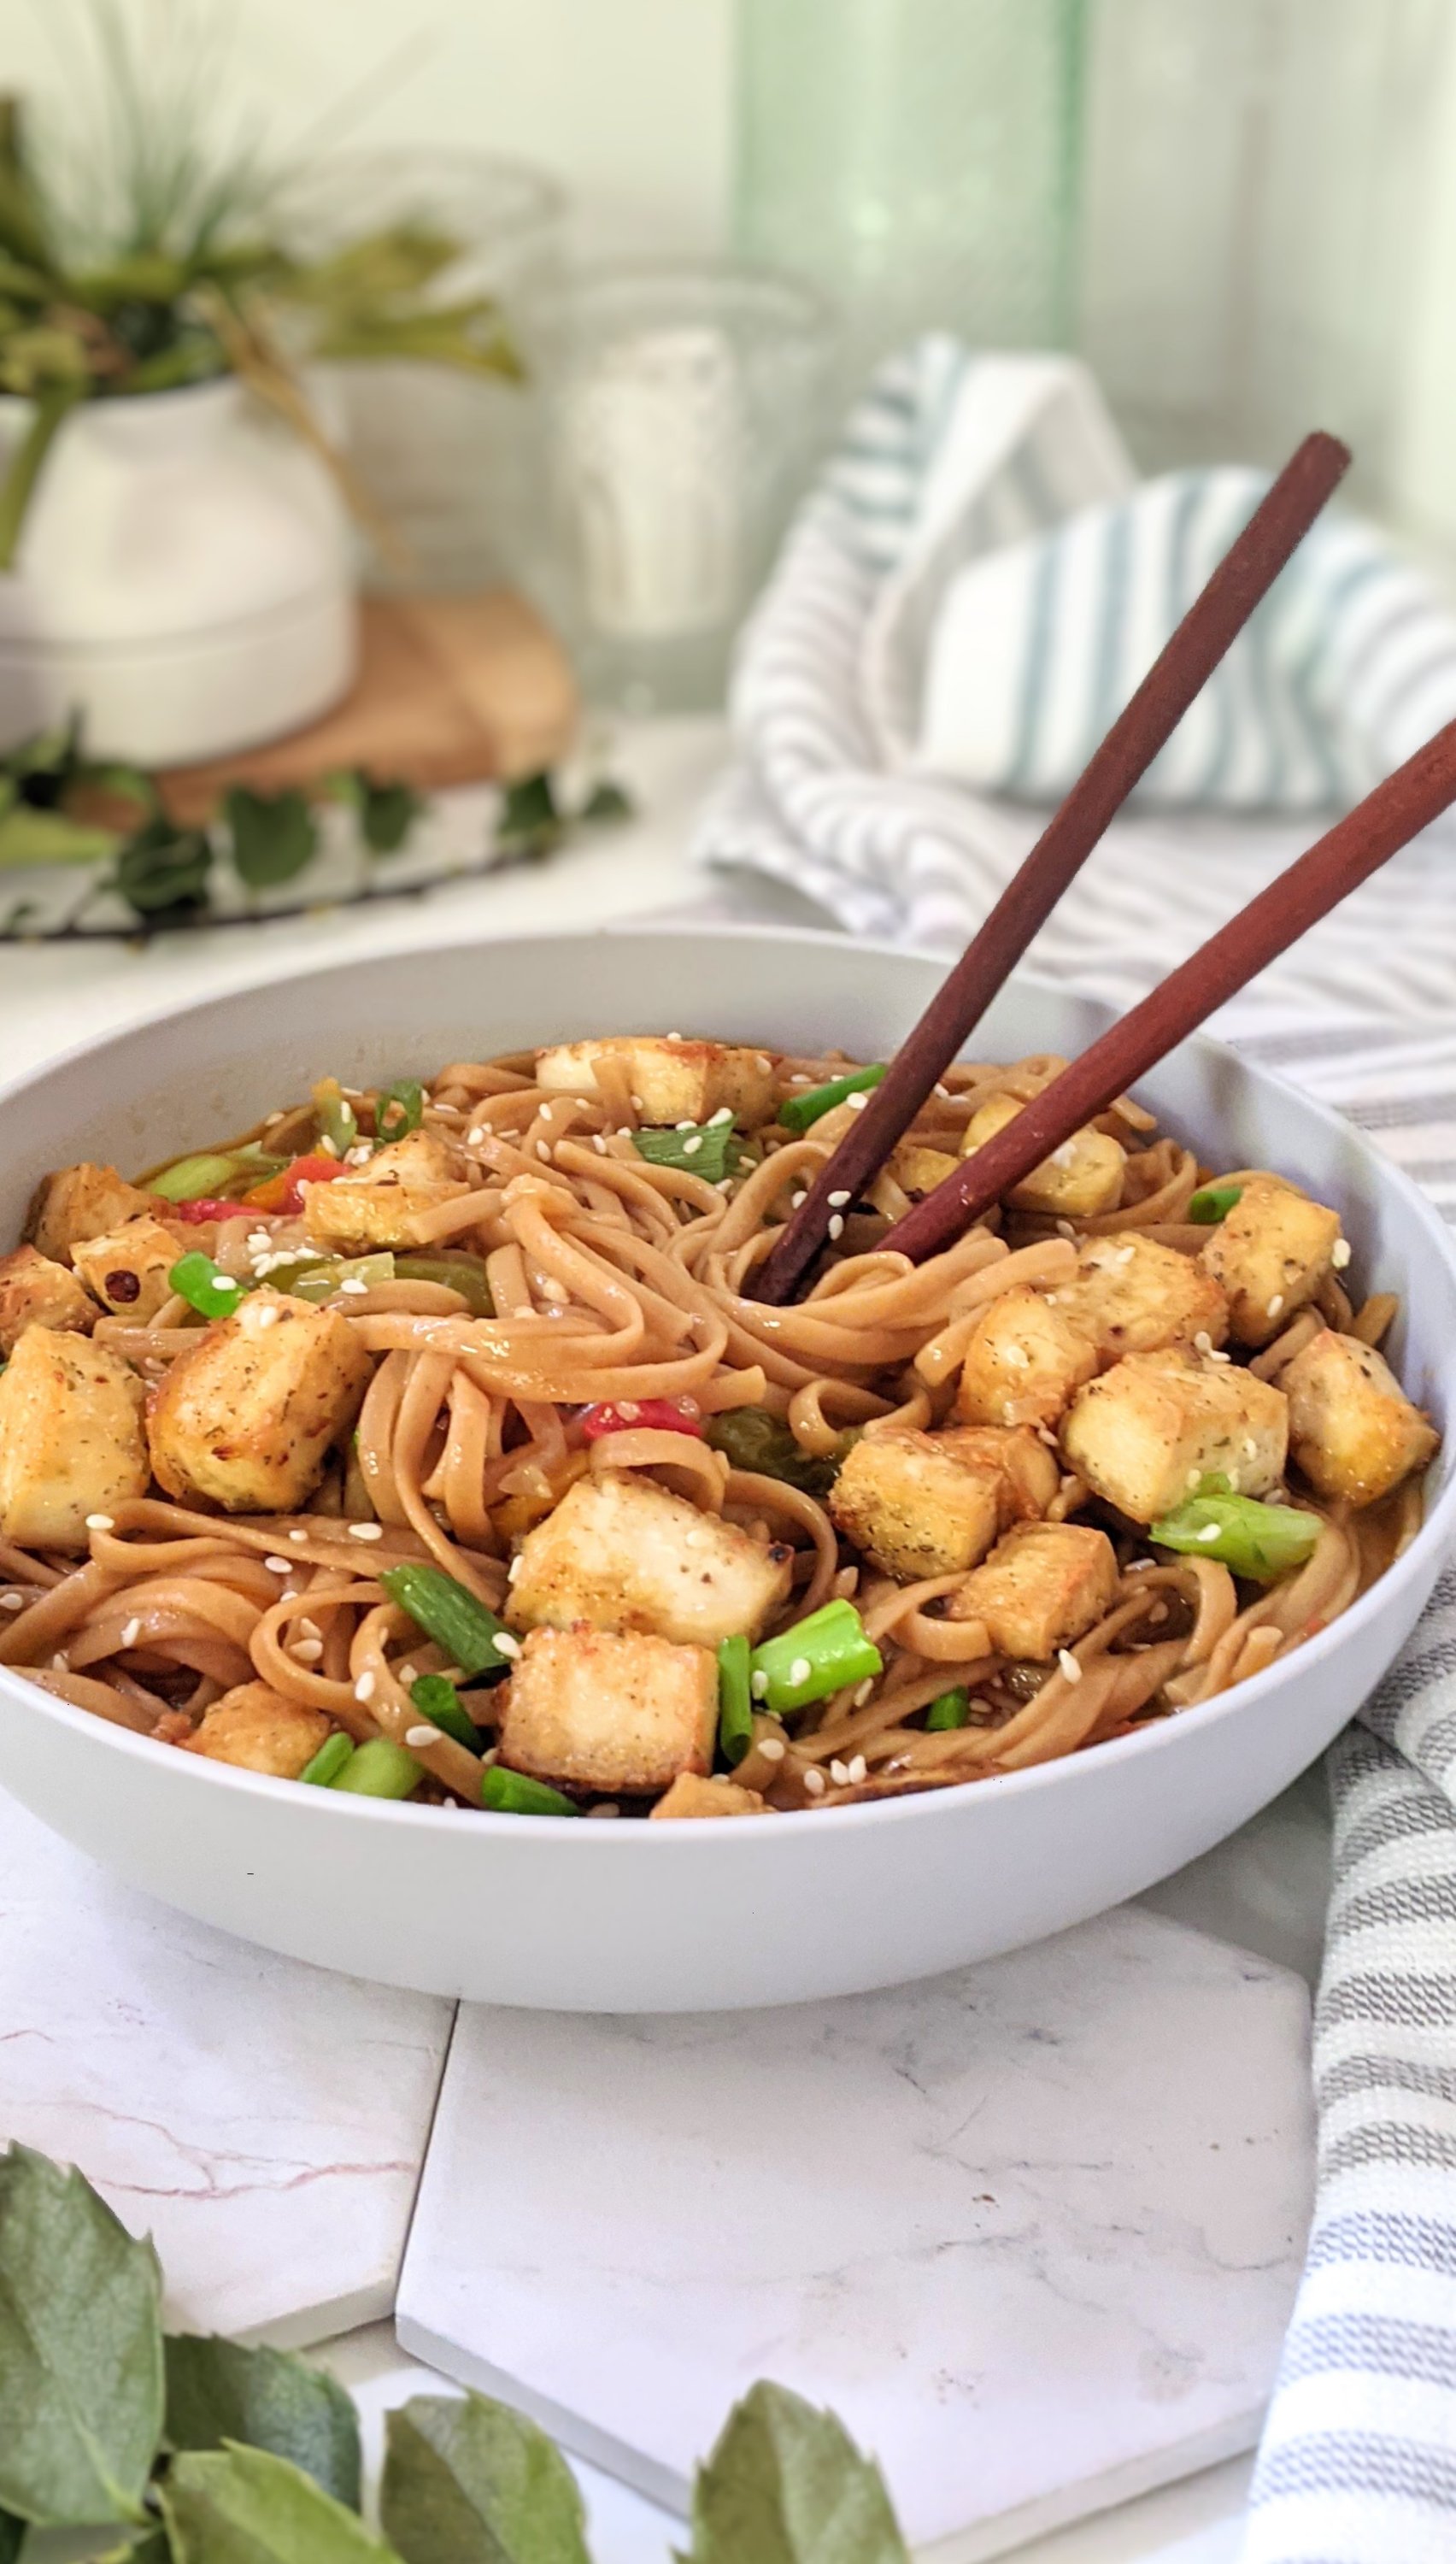 gluten free sticky garlic noodles vegetarian recipes with rice noodles dinner ideas stir fry tofu noodles sesame oil plant based asian dinner recipe ideas